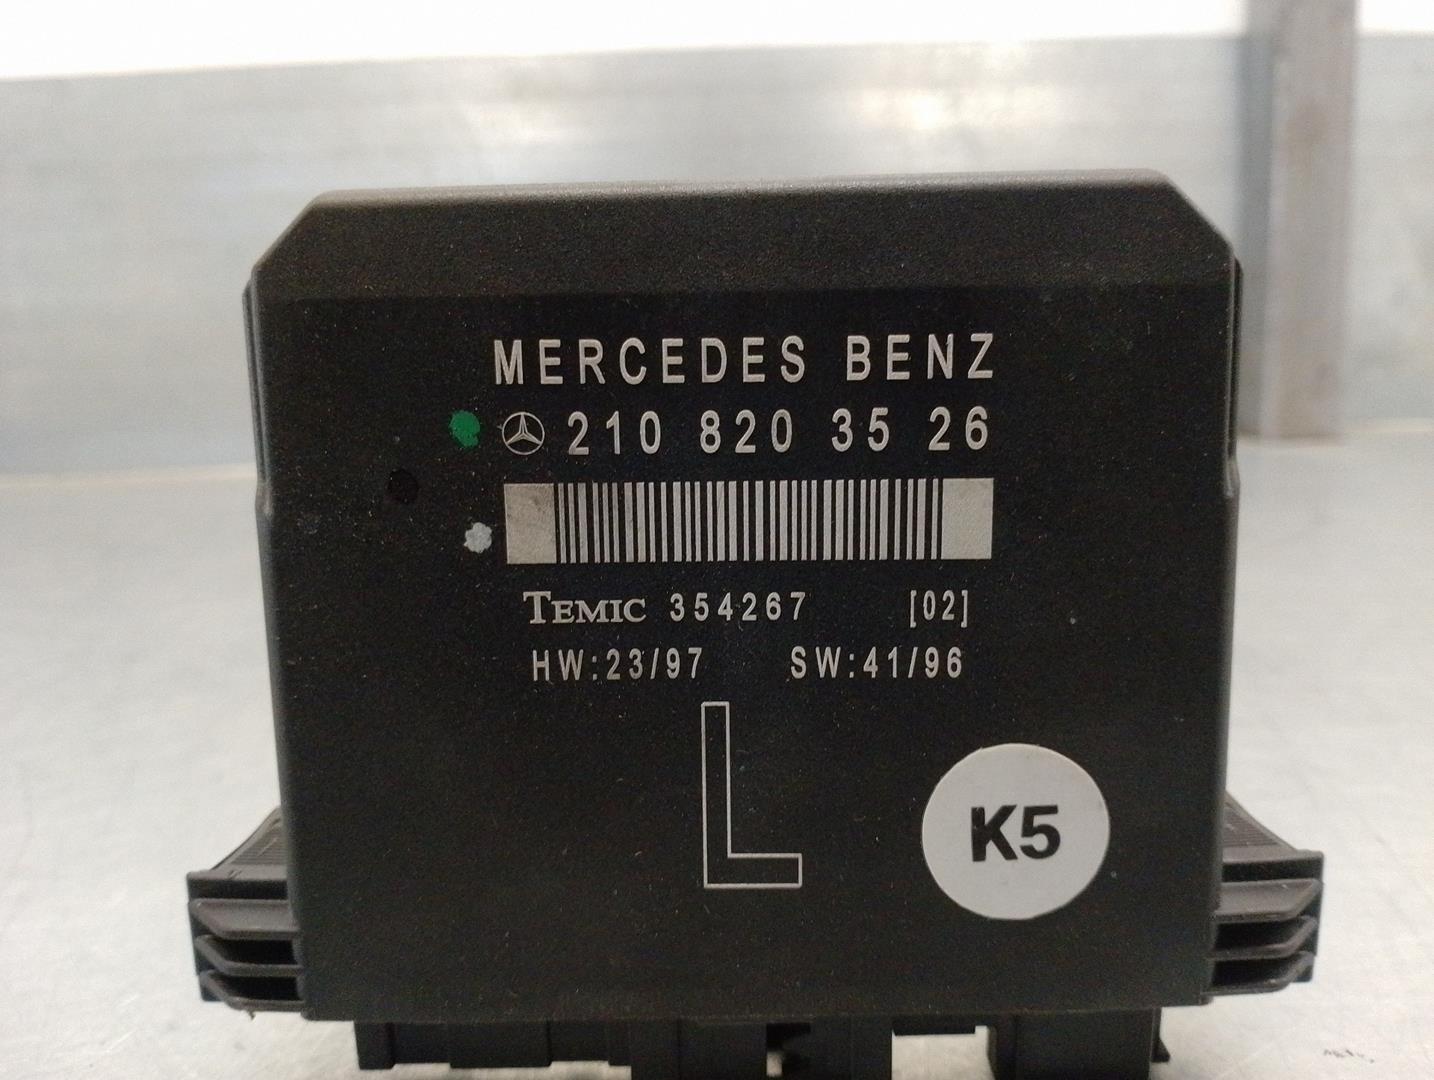 MERCEDES-BENZ C-Class W202/S202 (1993-2001) Other Control Units 2108203526, 354267, TEMIC 21721518